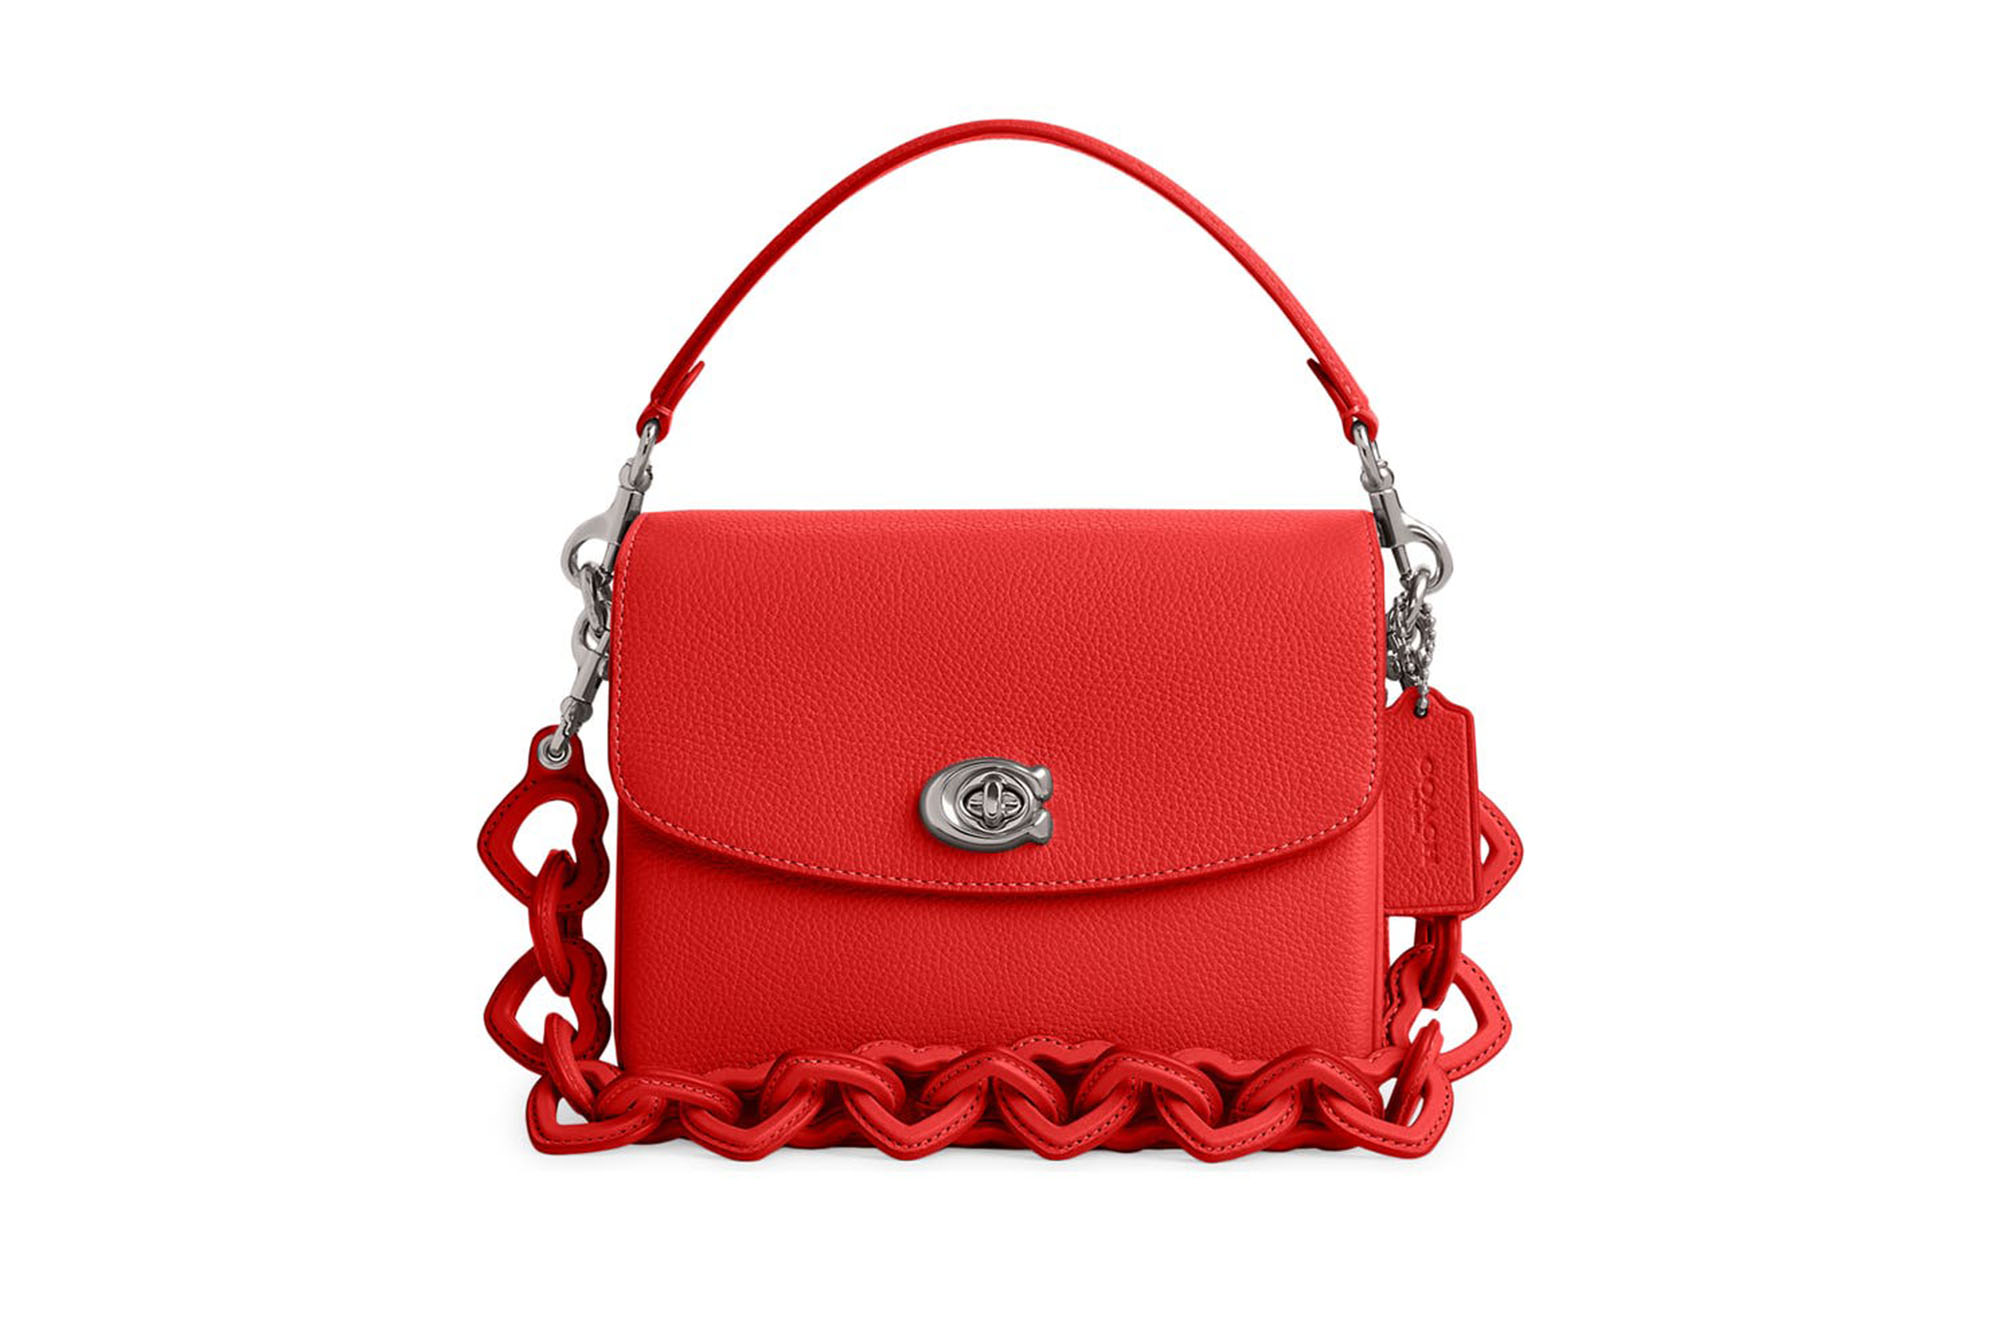 Red coach purse for sale - clothing & accessories - by owner - apparel sale  - craigslist